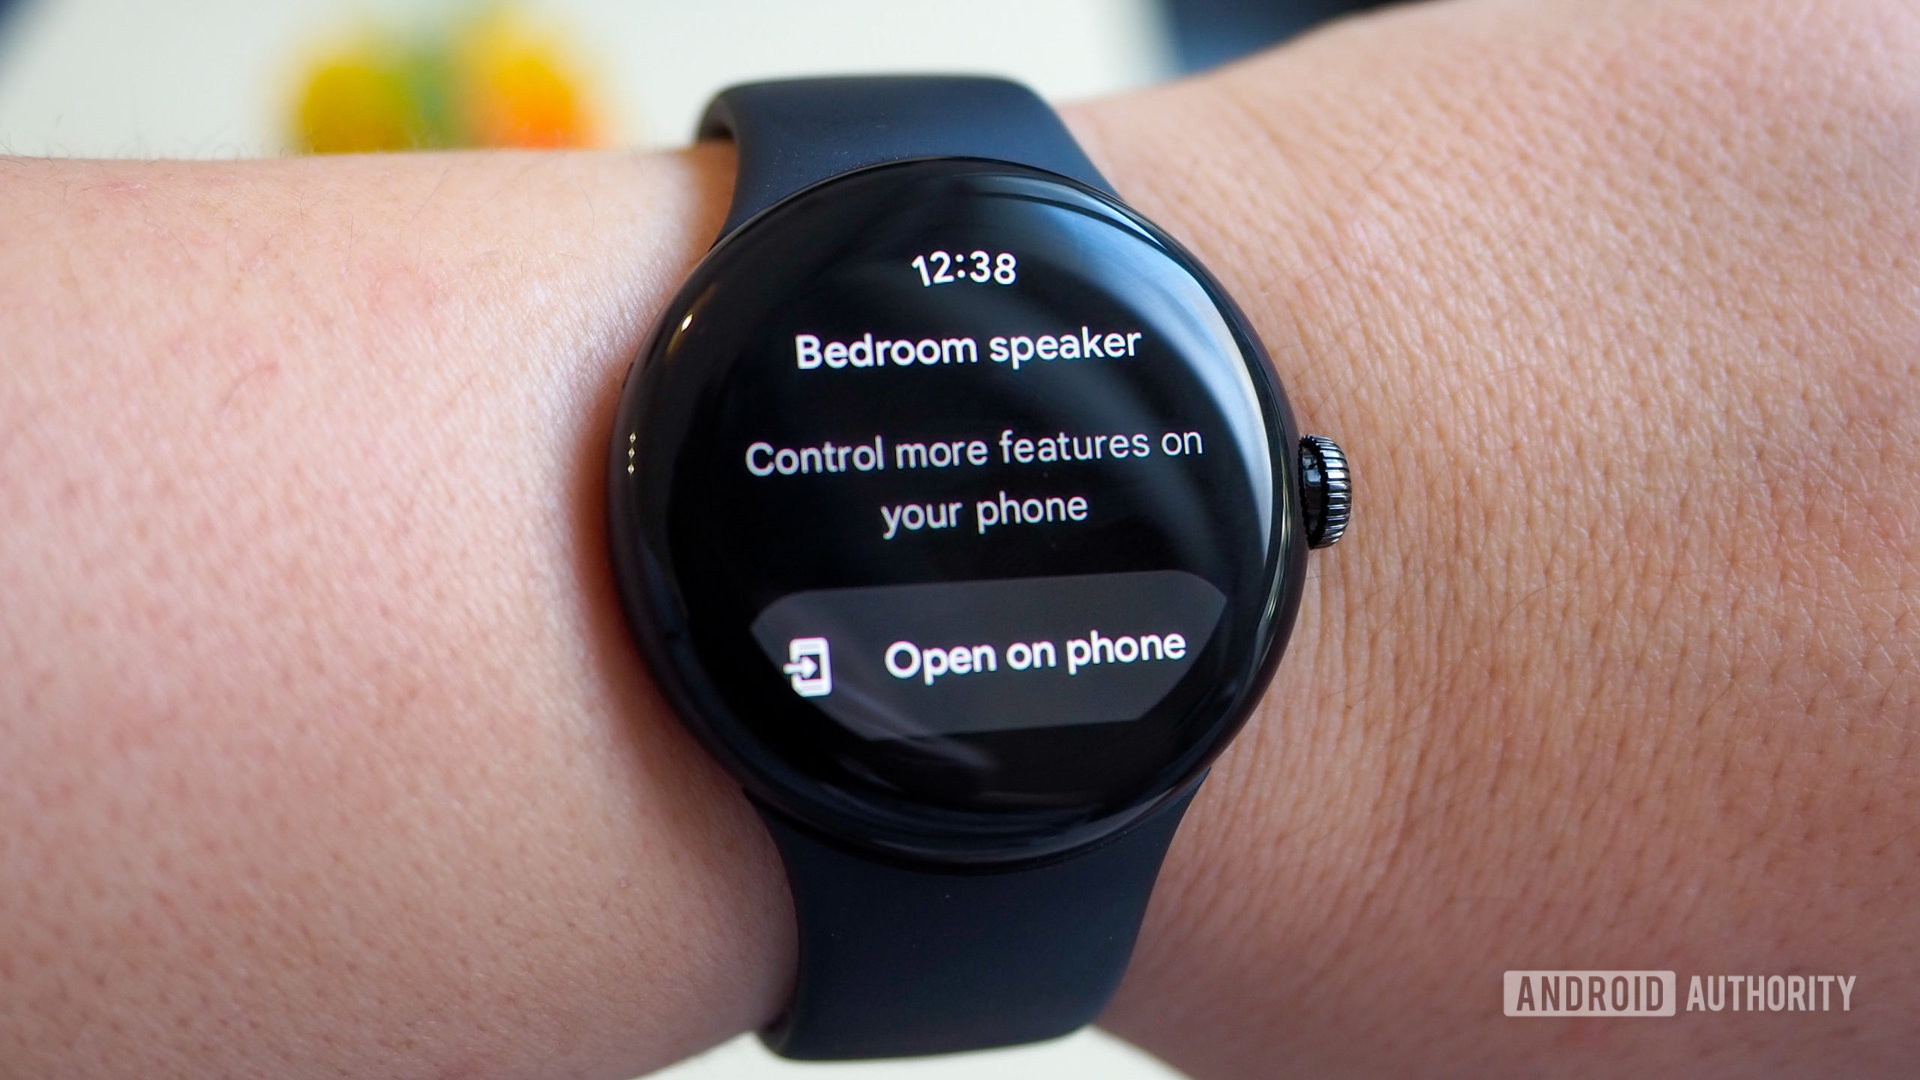 Google Home app on the Pixel Watch prompting you to open the app on the phone for more controls